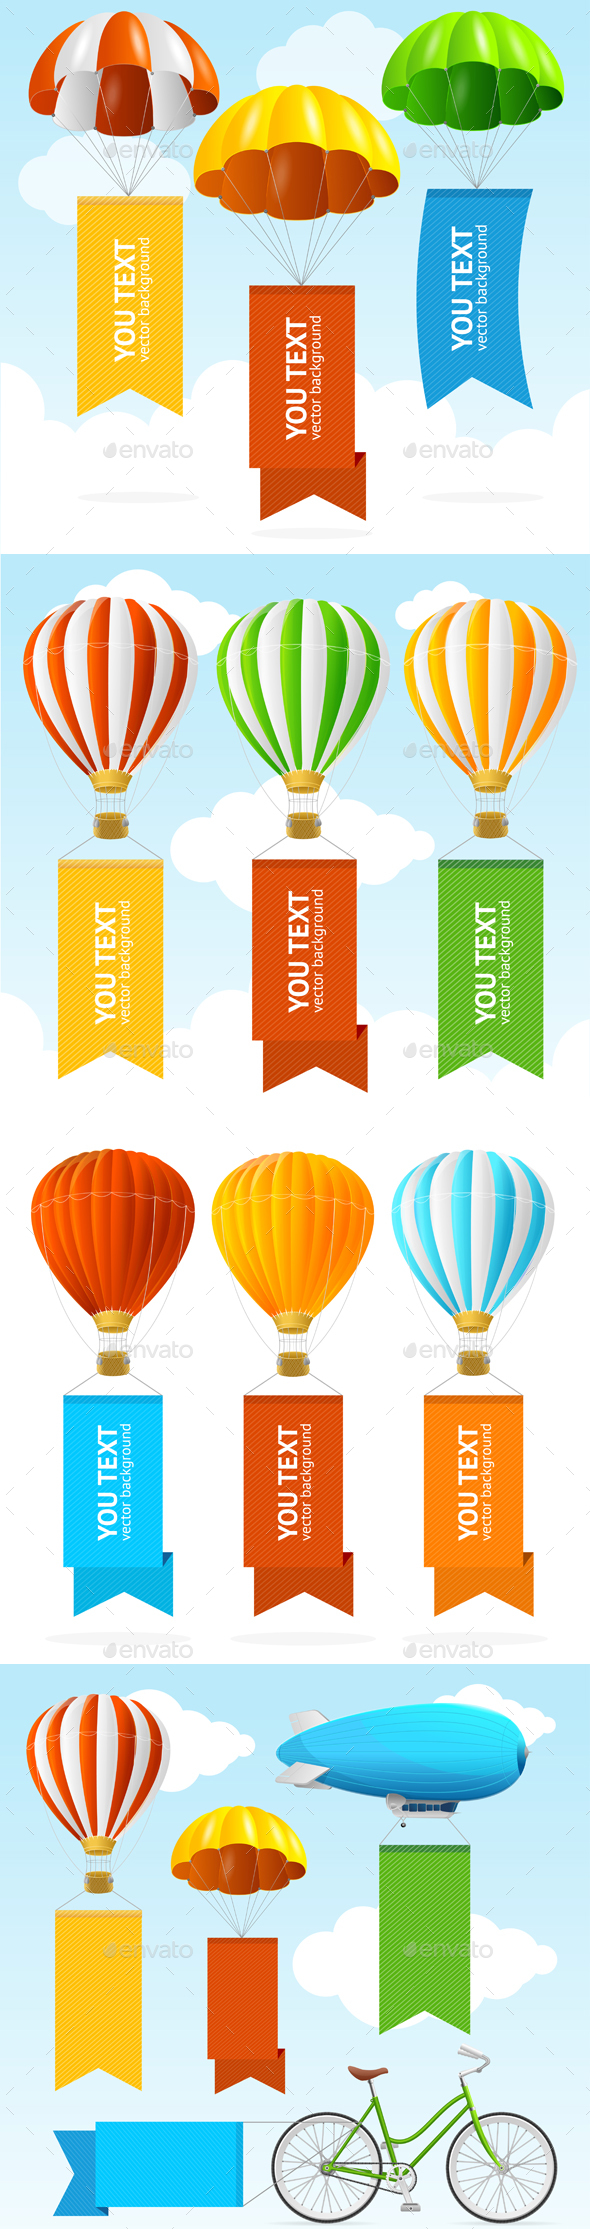 Airship Transport Banners. Vector